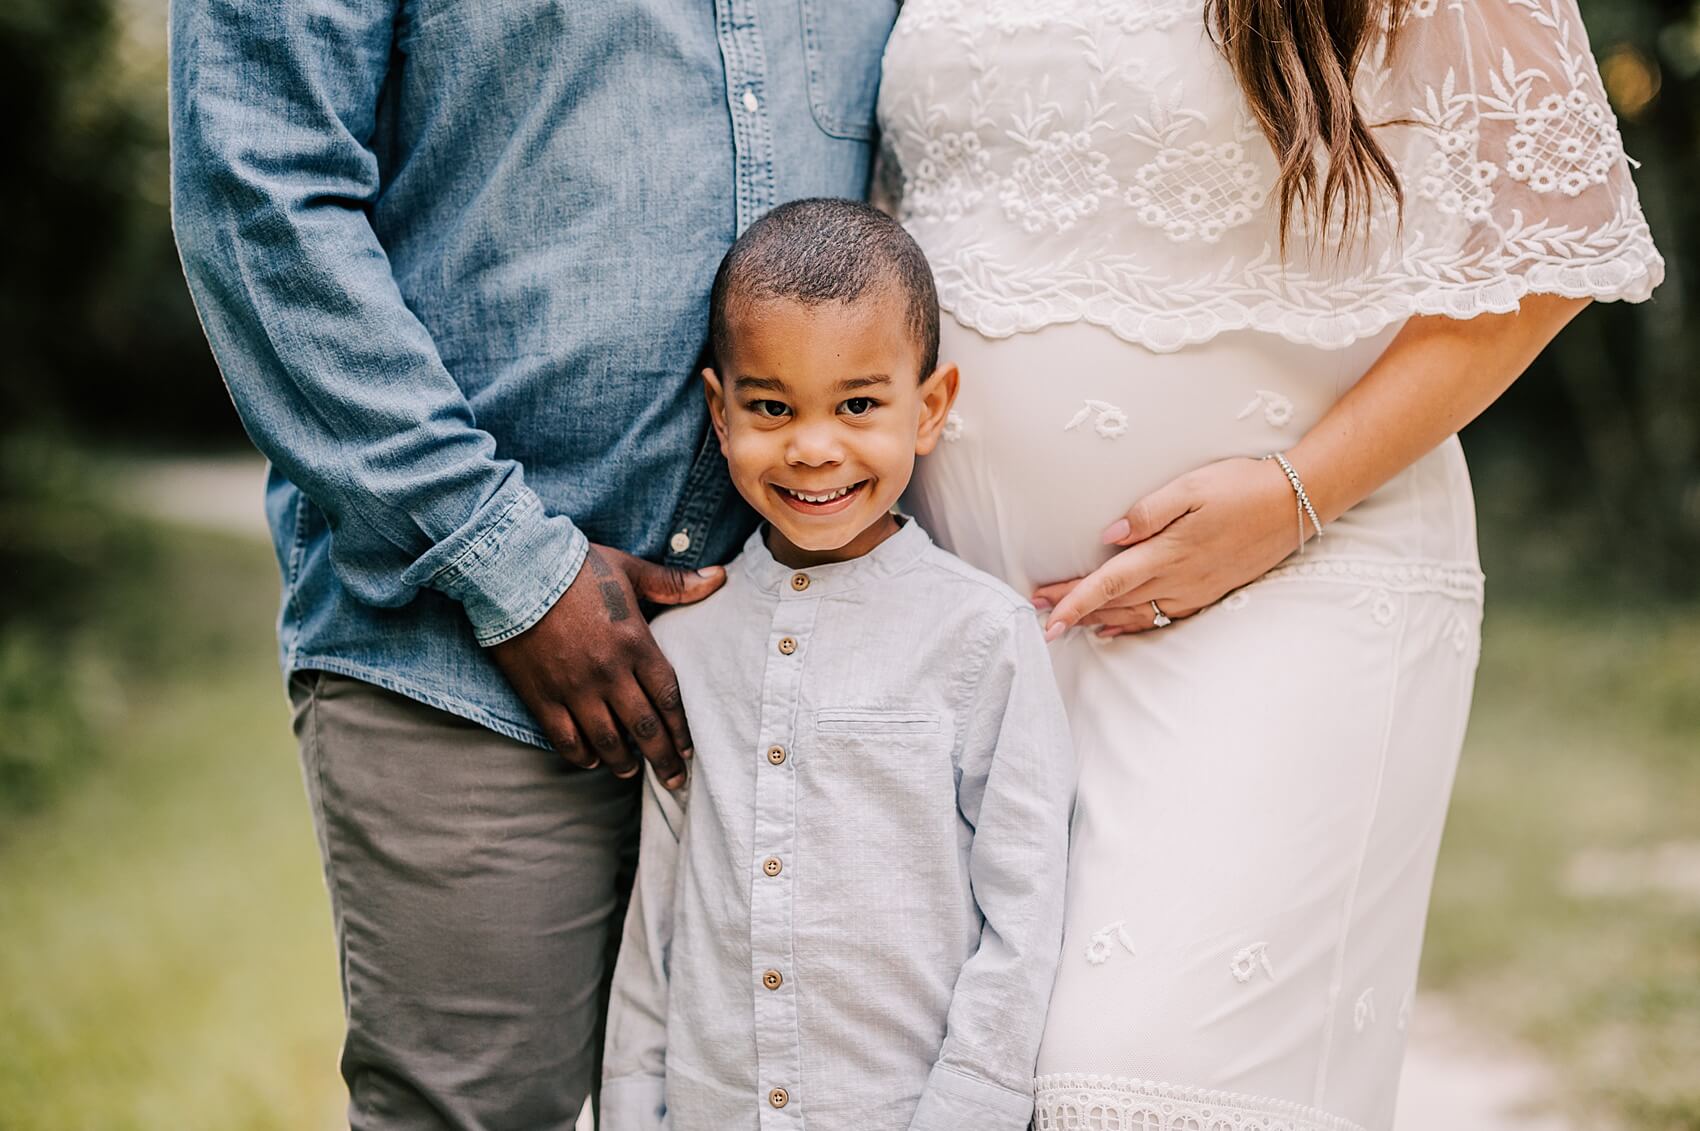 A young boy smiles big in a grey shirt between his pregnant mom in a white lace maternity gown and dad in a denim shirt and grey pants in a park after attending growing years learning center